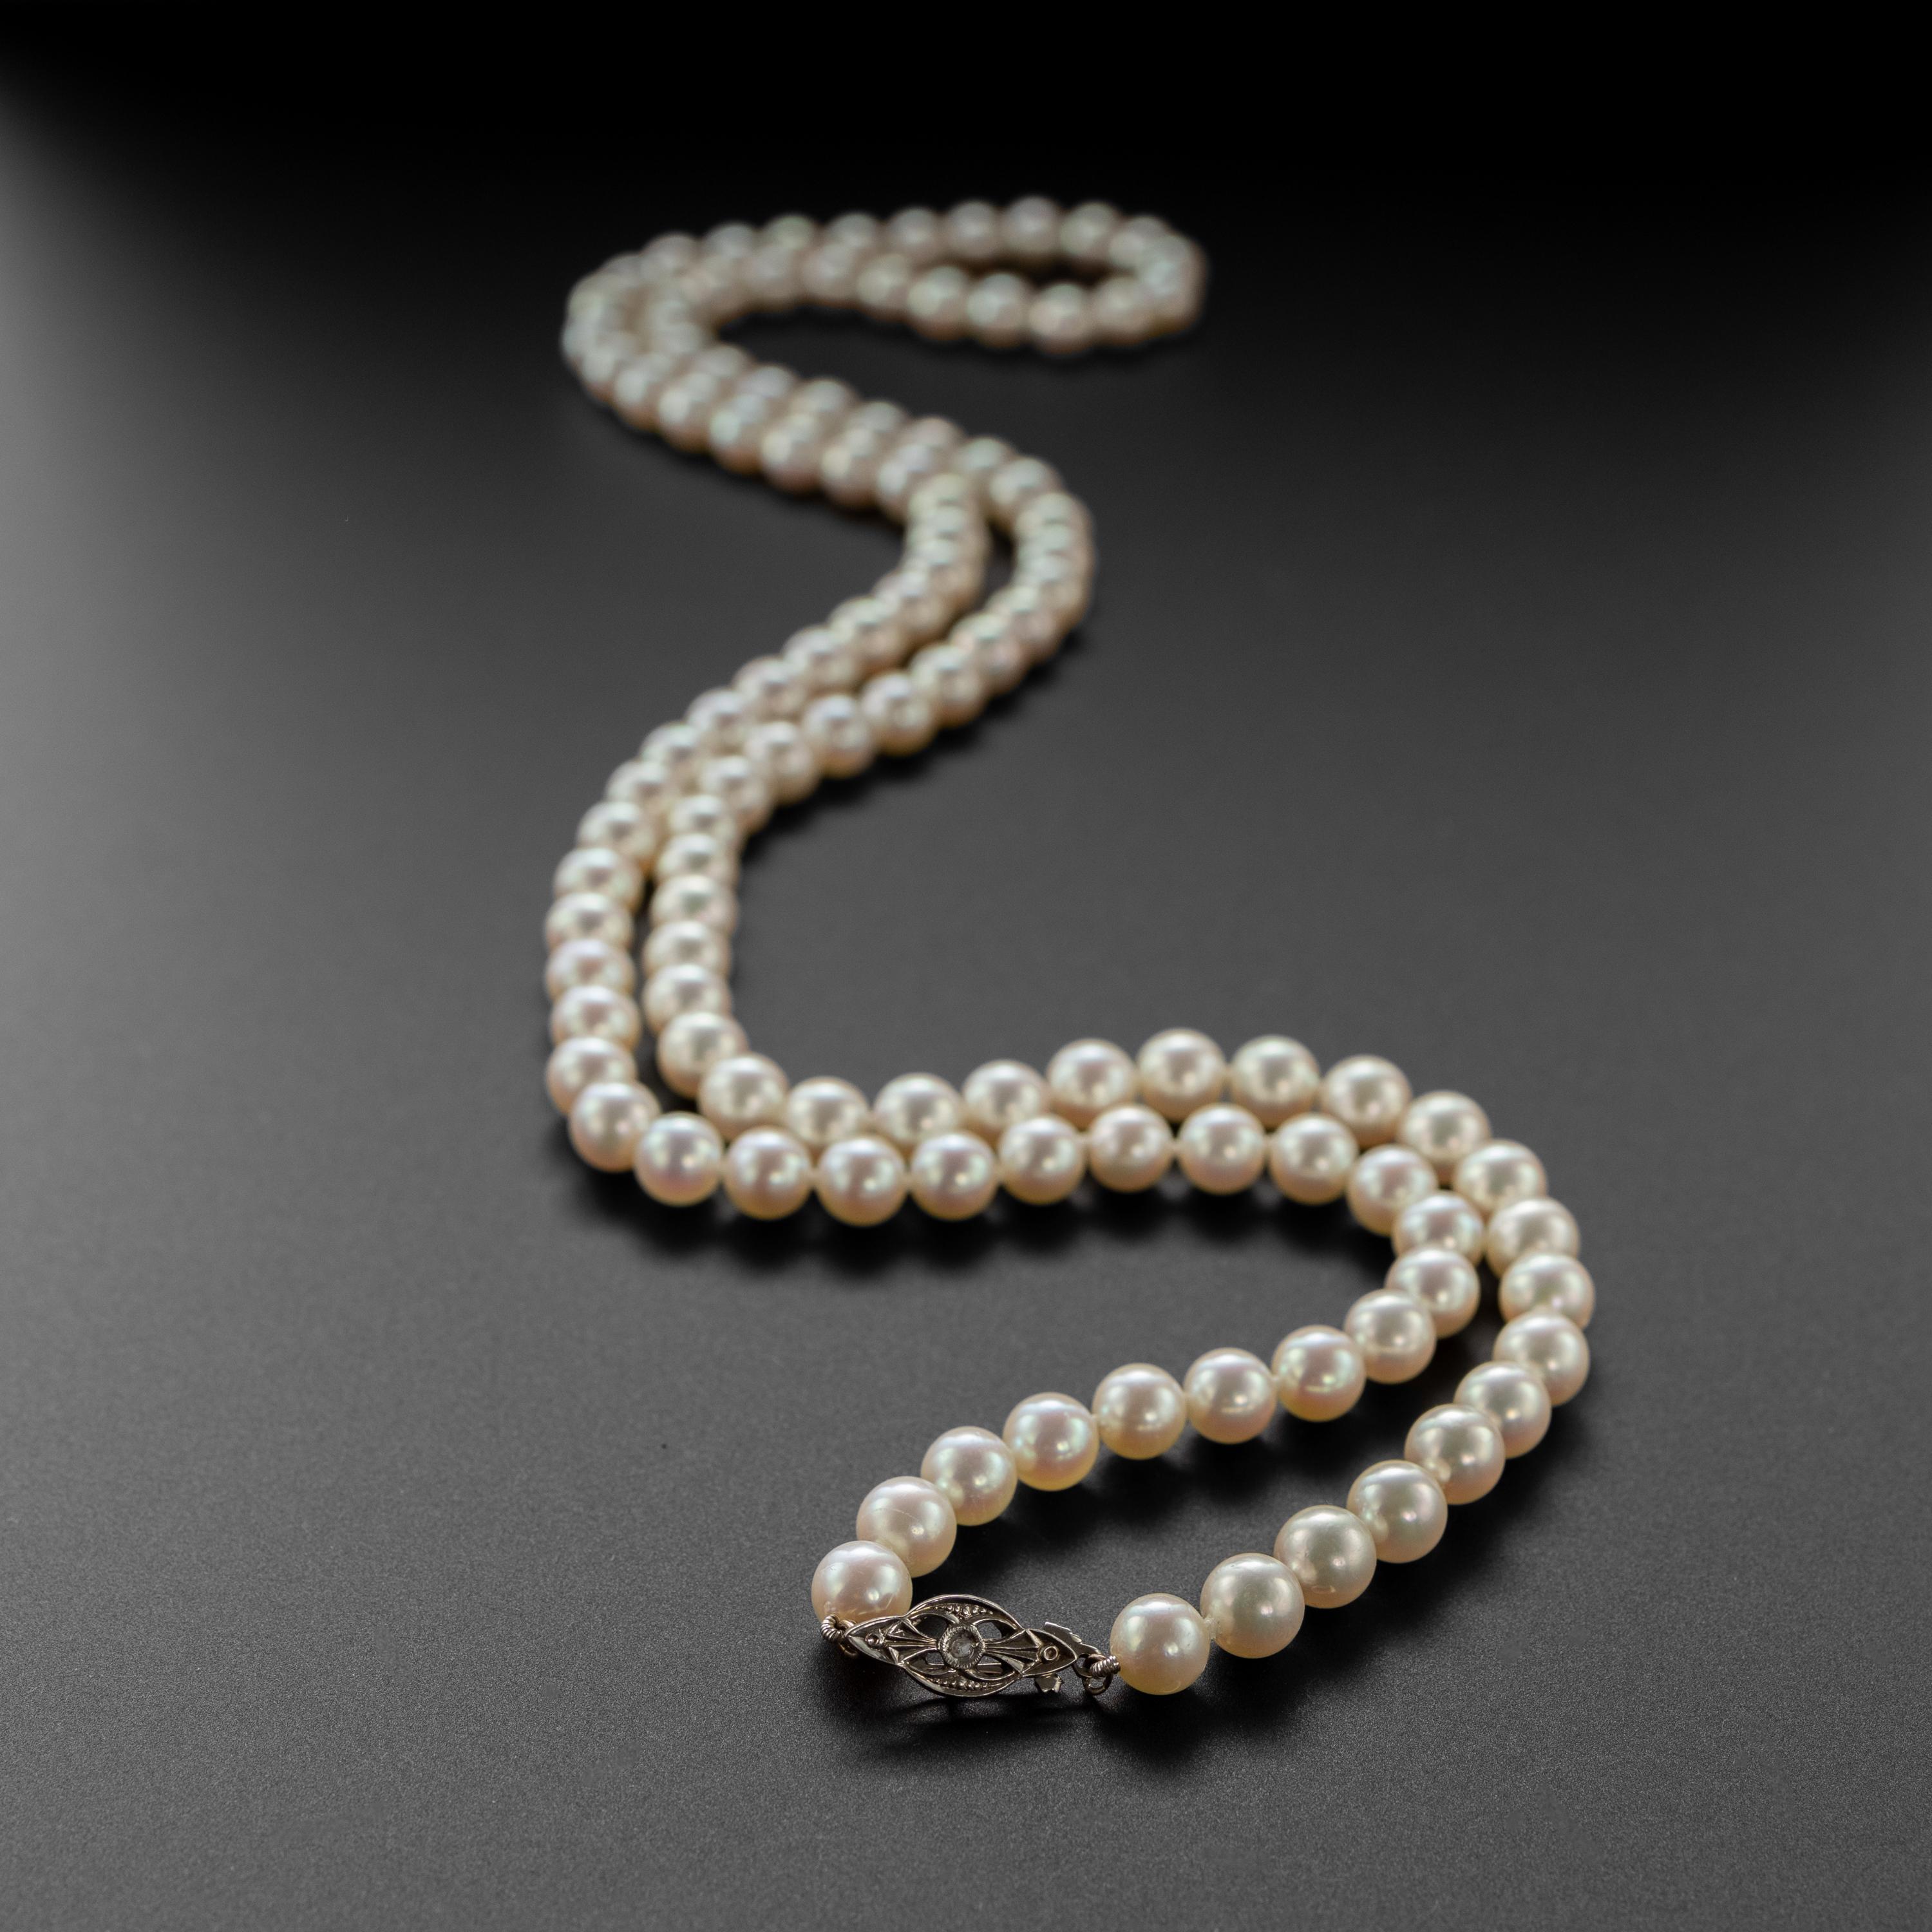 Bead Art Deco Necklace of Fine Cultured Akoya Pearls